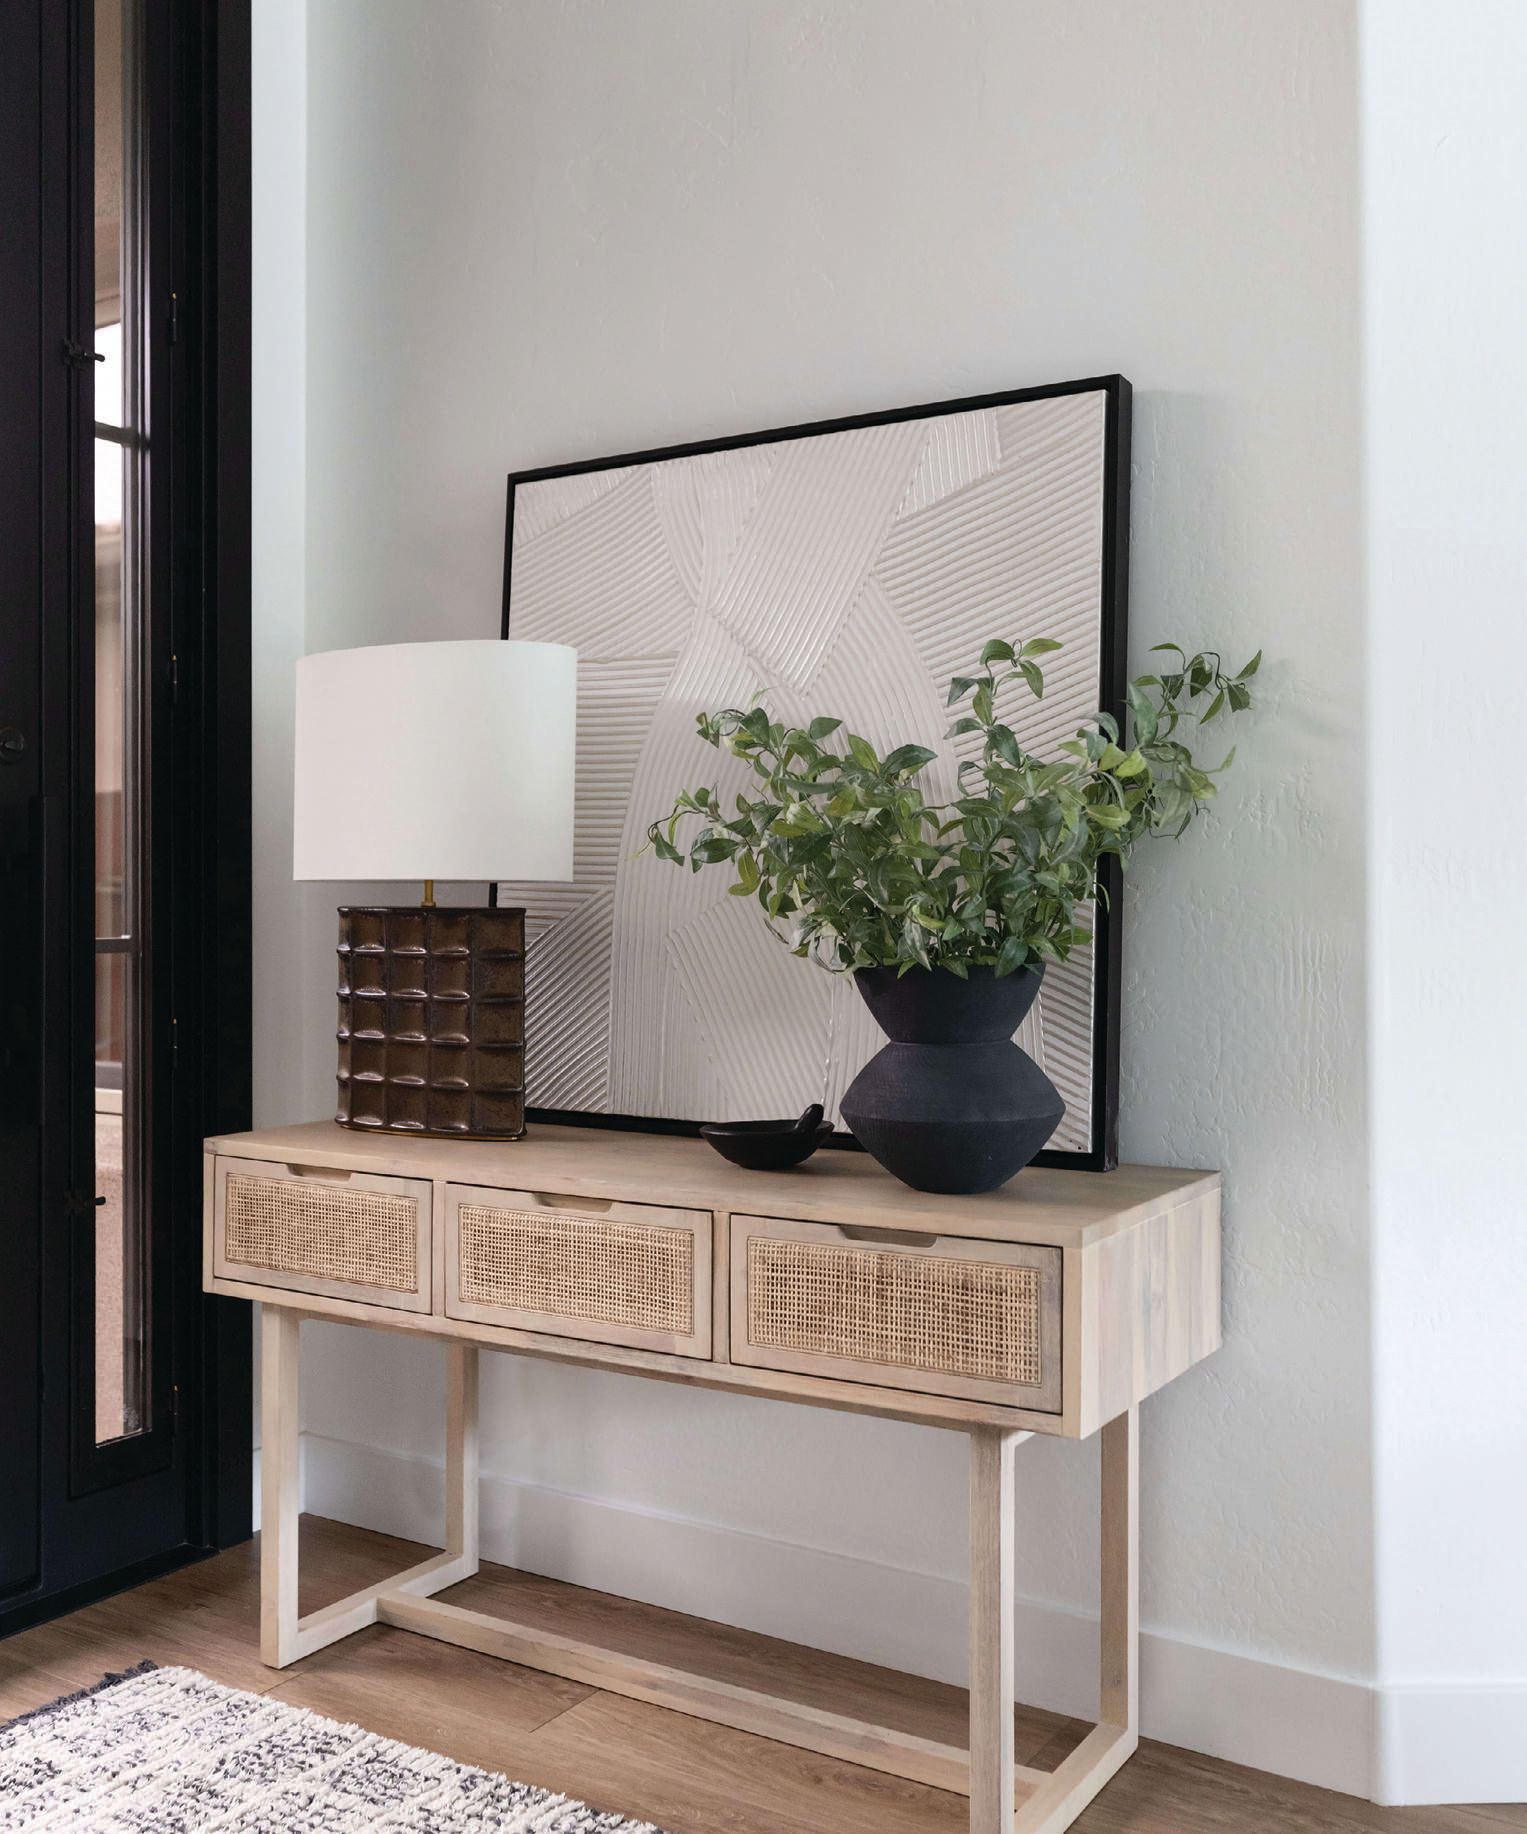 Four Hands’ Clarita console table and the Struttura medium table lamp from Visual Comfort greet guests in the entryway. Photographed by Life Created